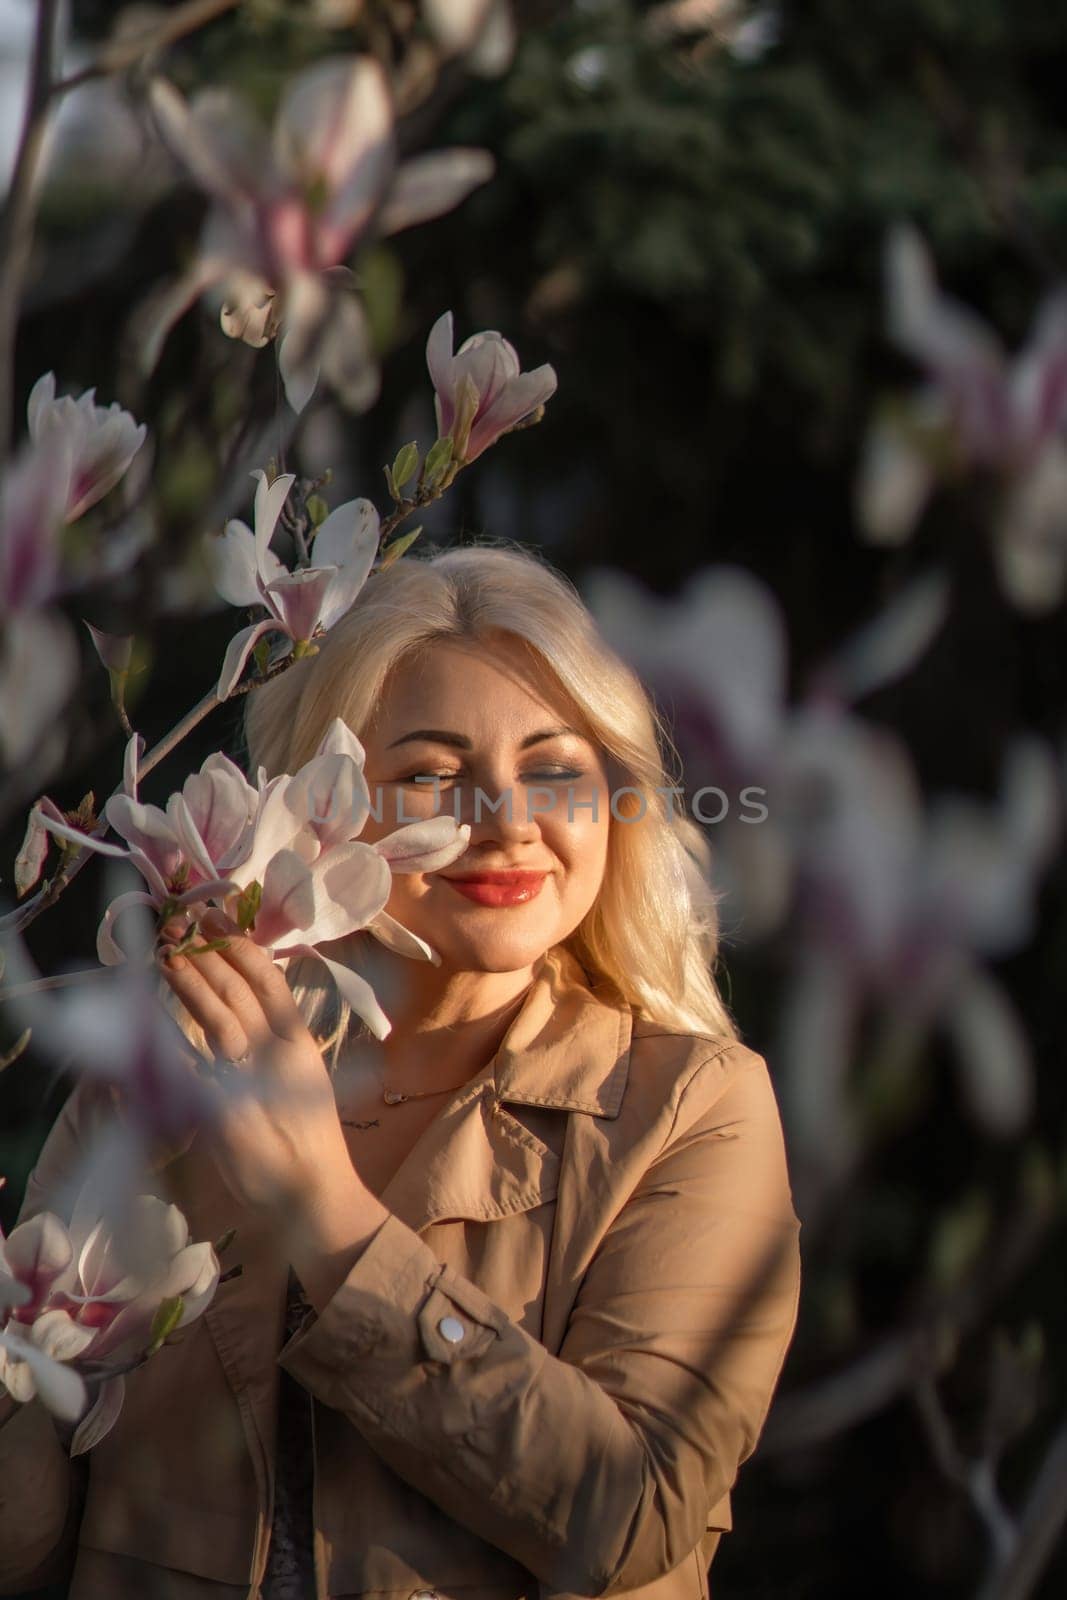 A woman is holding a magnolia flower in her hand and standing in front of a tree. Concept of serenity and beauty, as the woman is surrounded by nature and the flower adds a touch of color. by Matiunina